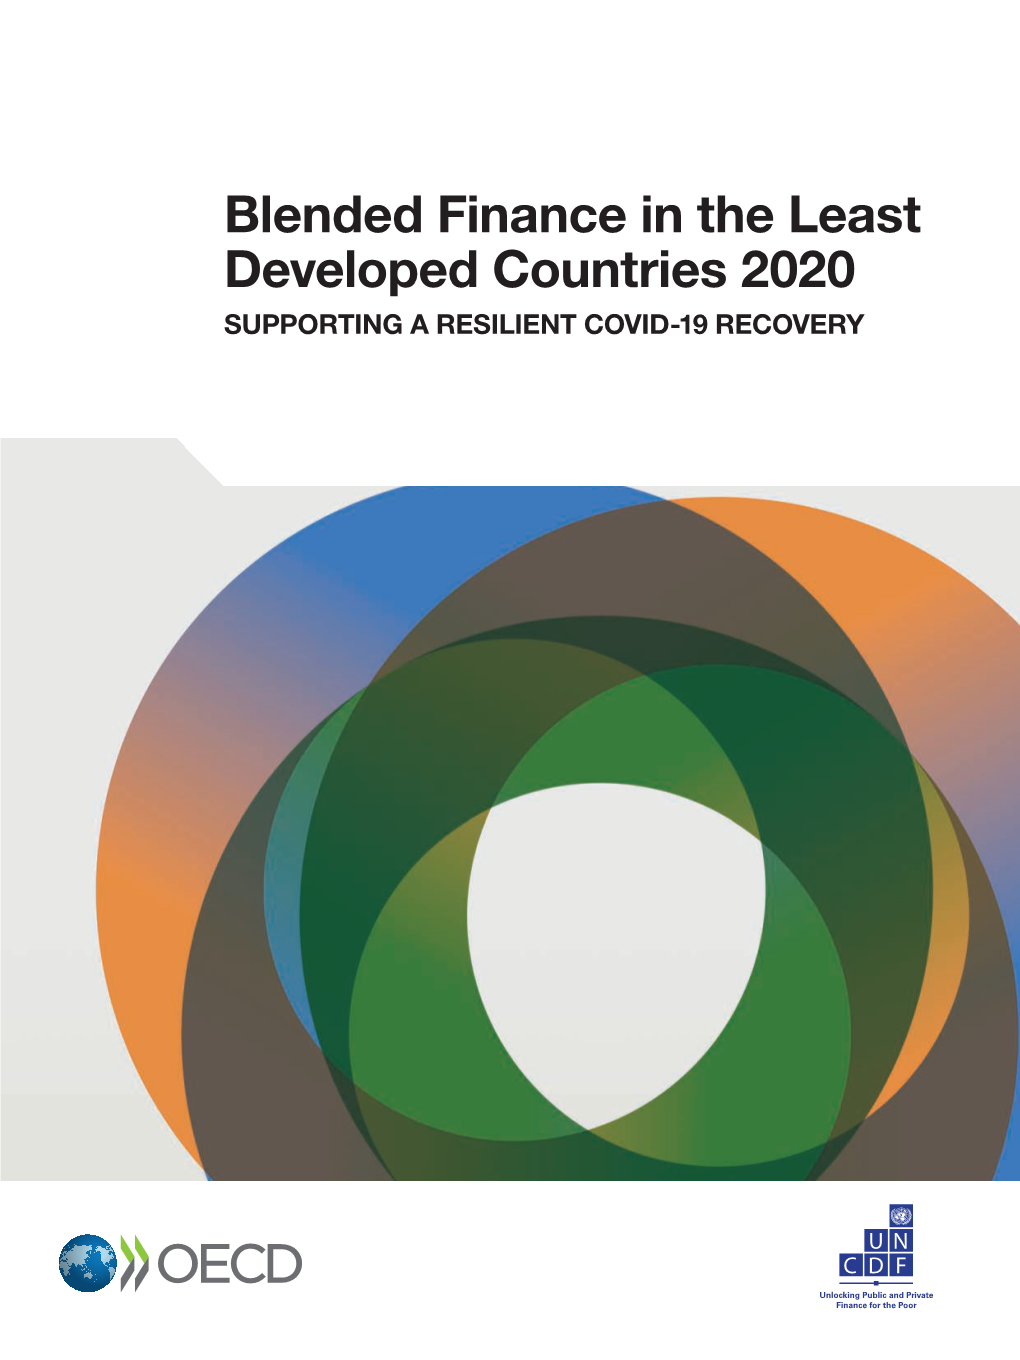 Blended Finance in the Least Developed Countries 2020